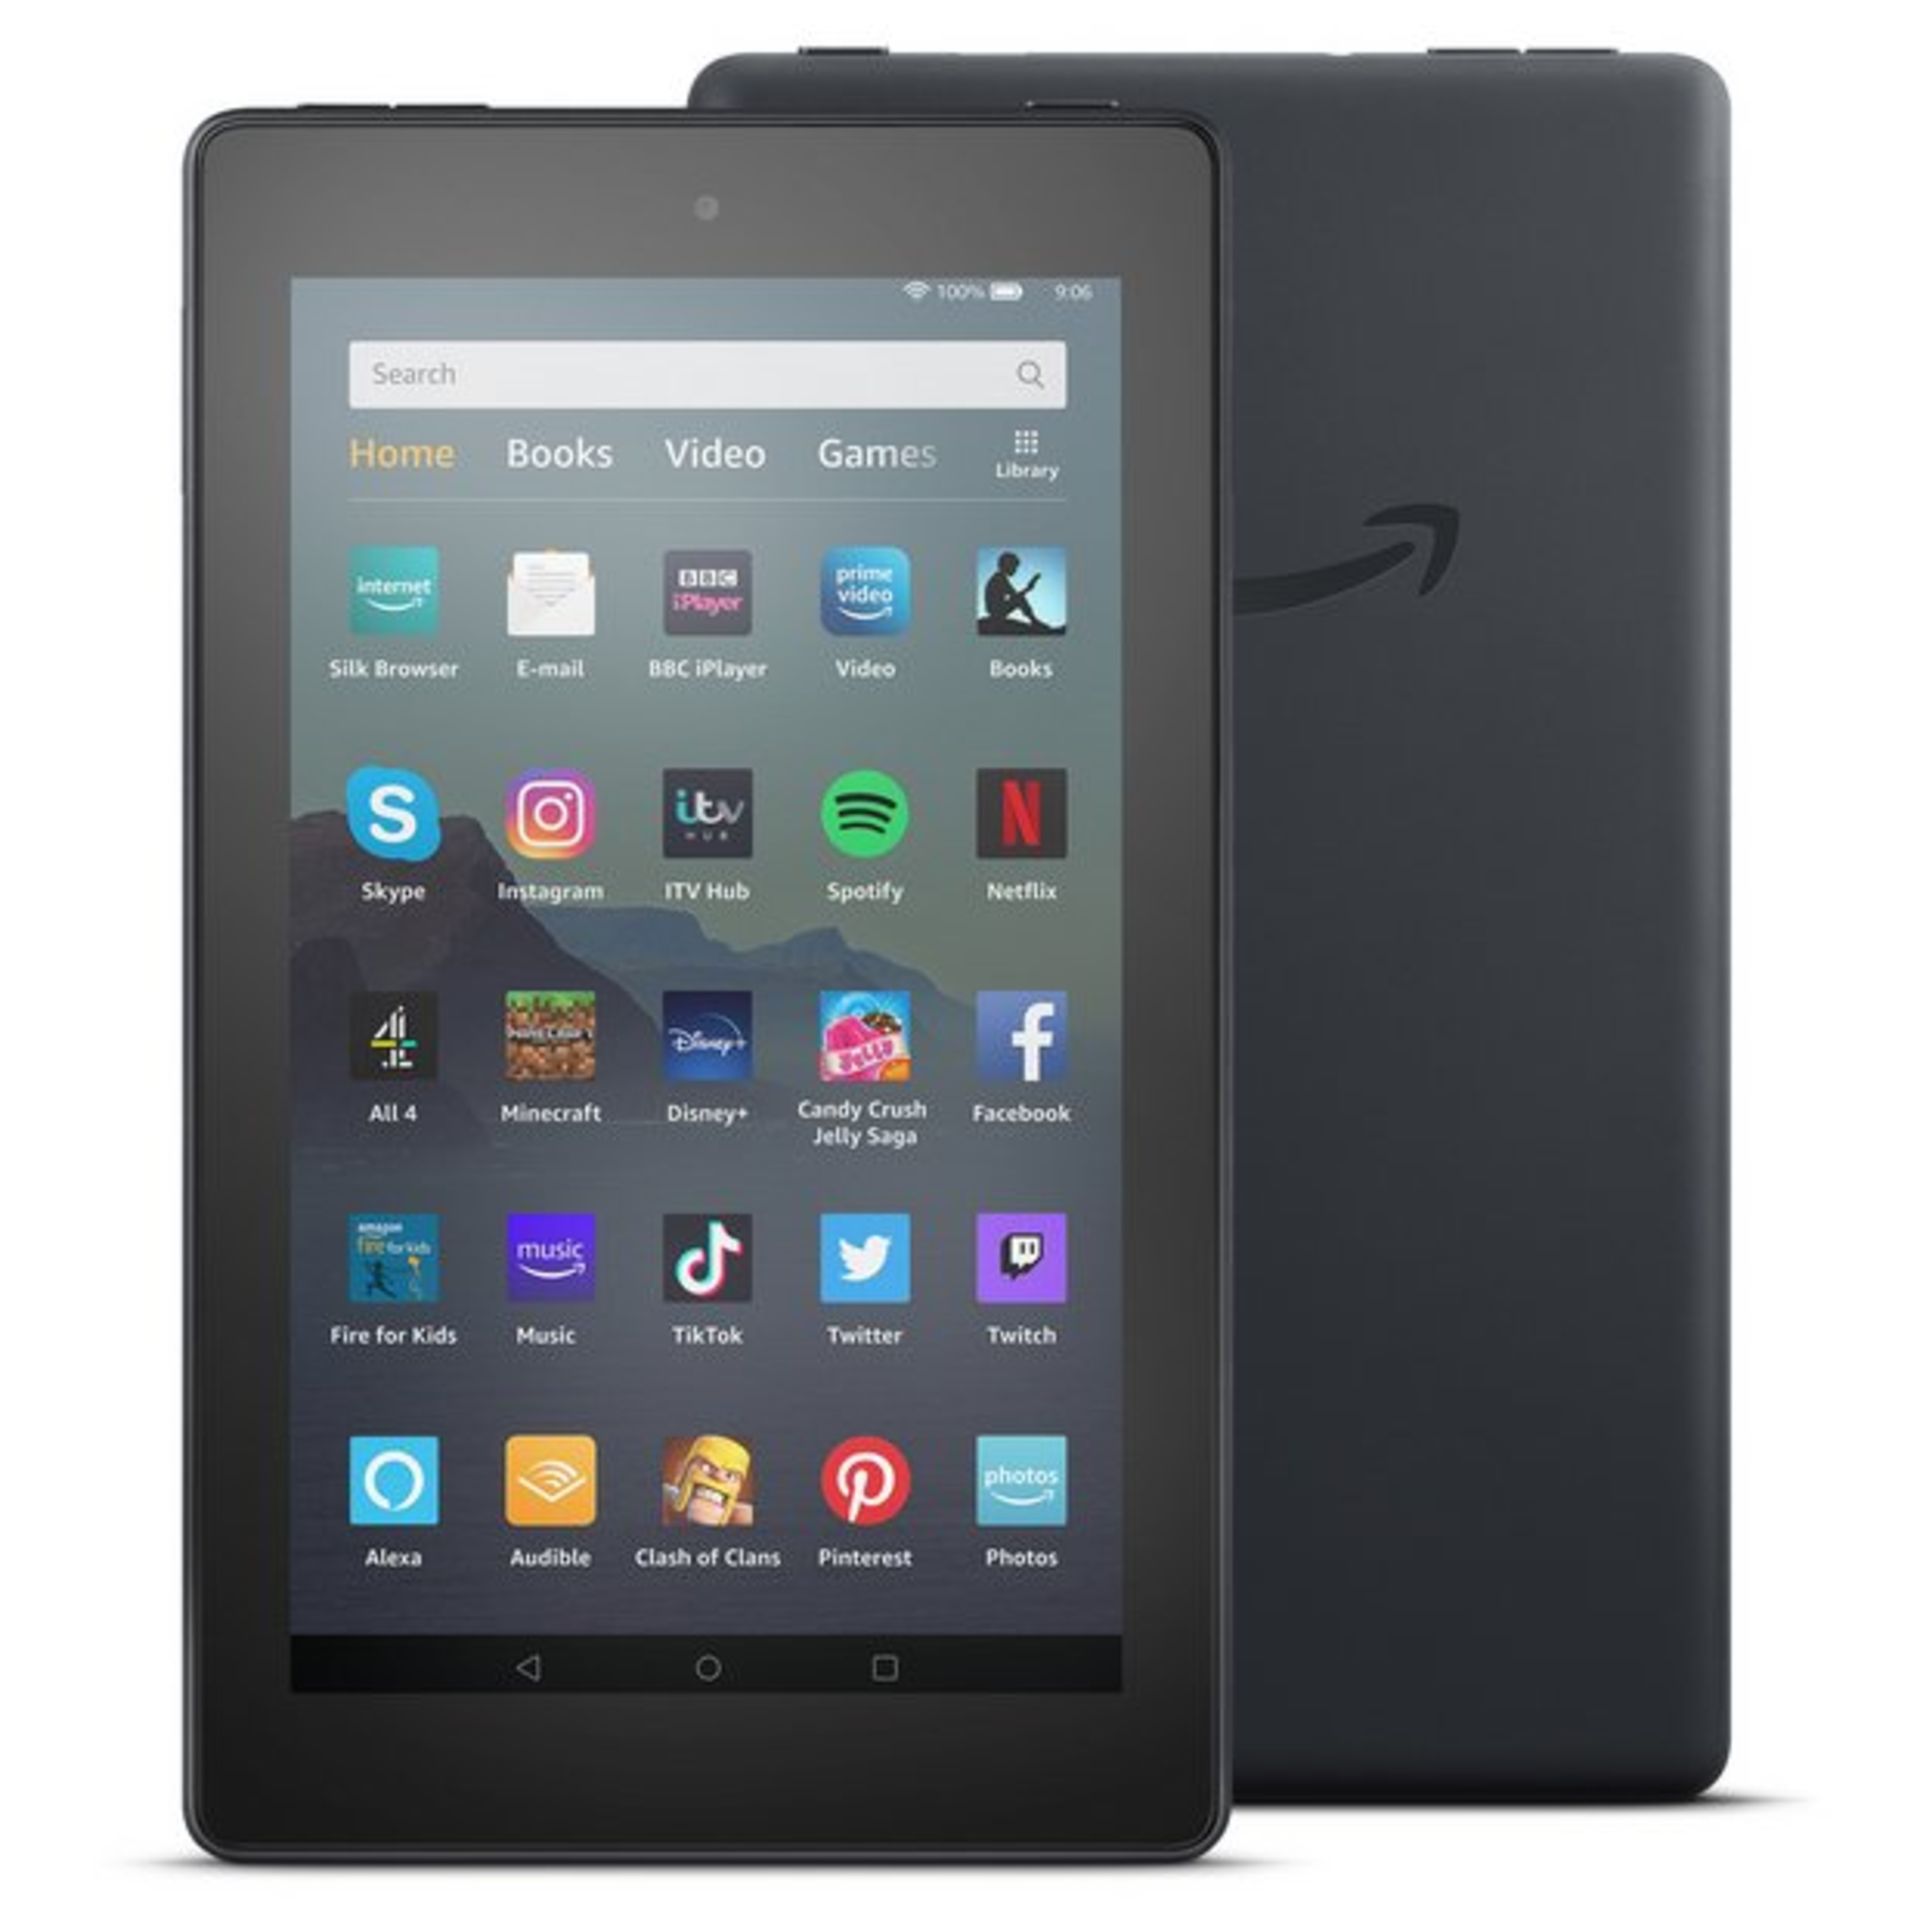 All-New Fire 7 Tablet, 7" Display, 8 GB, Black — with SpeciaCondition ReportFULLY WORKING ORDER,